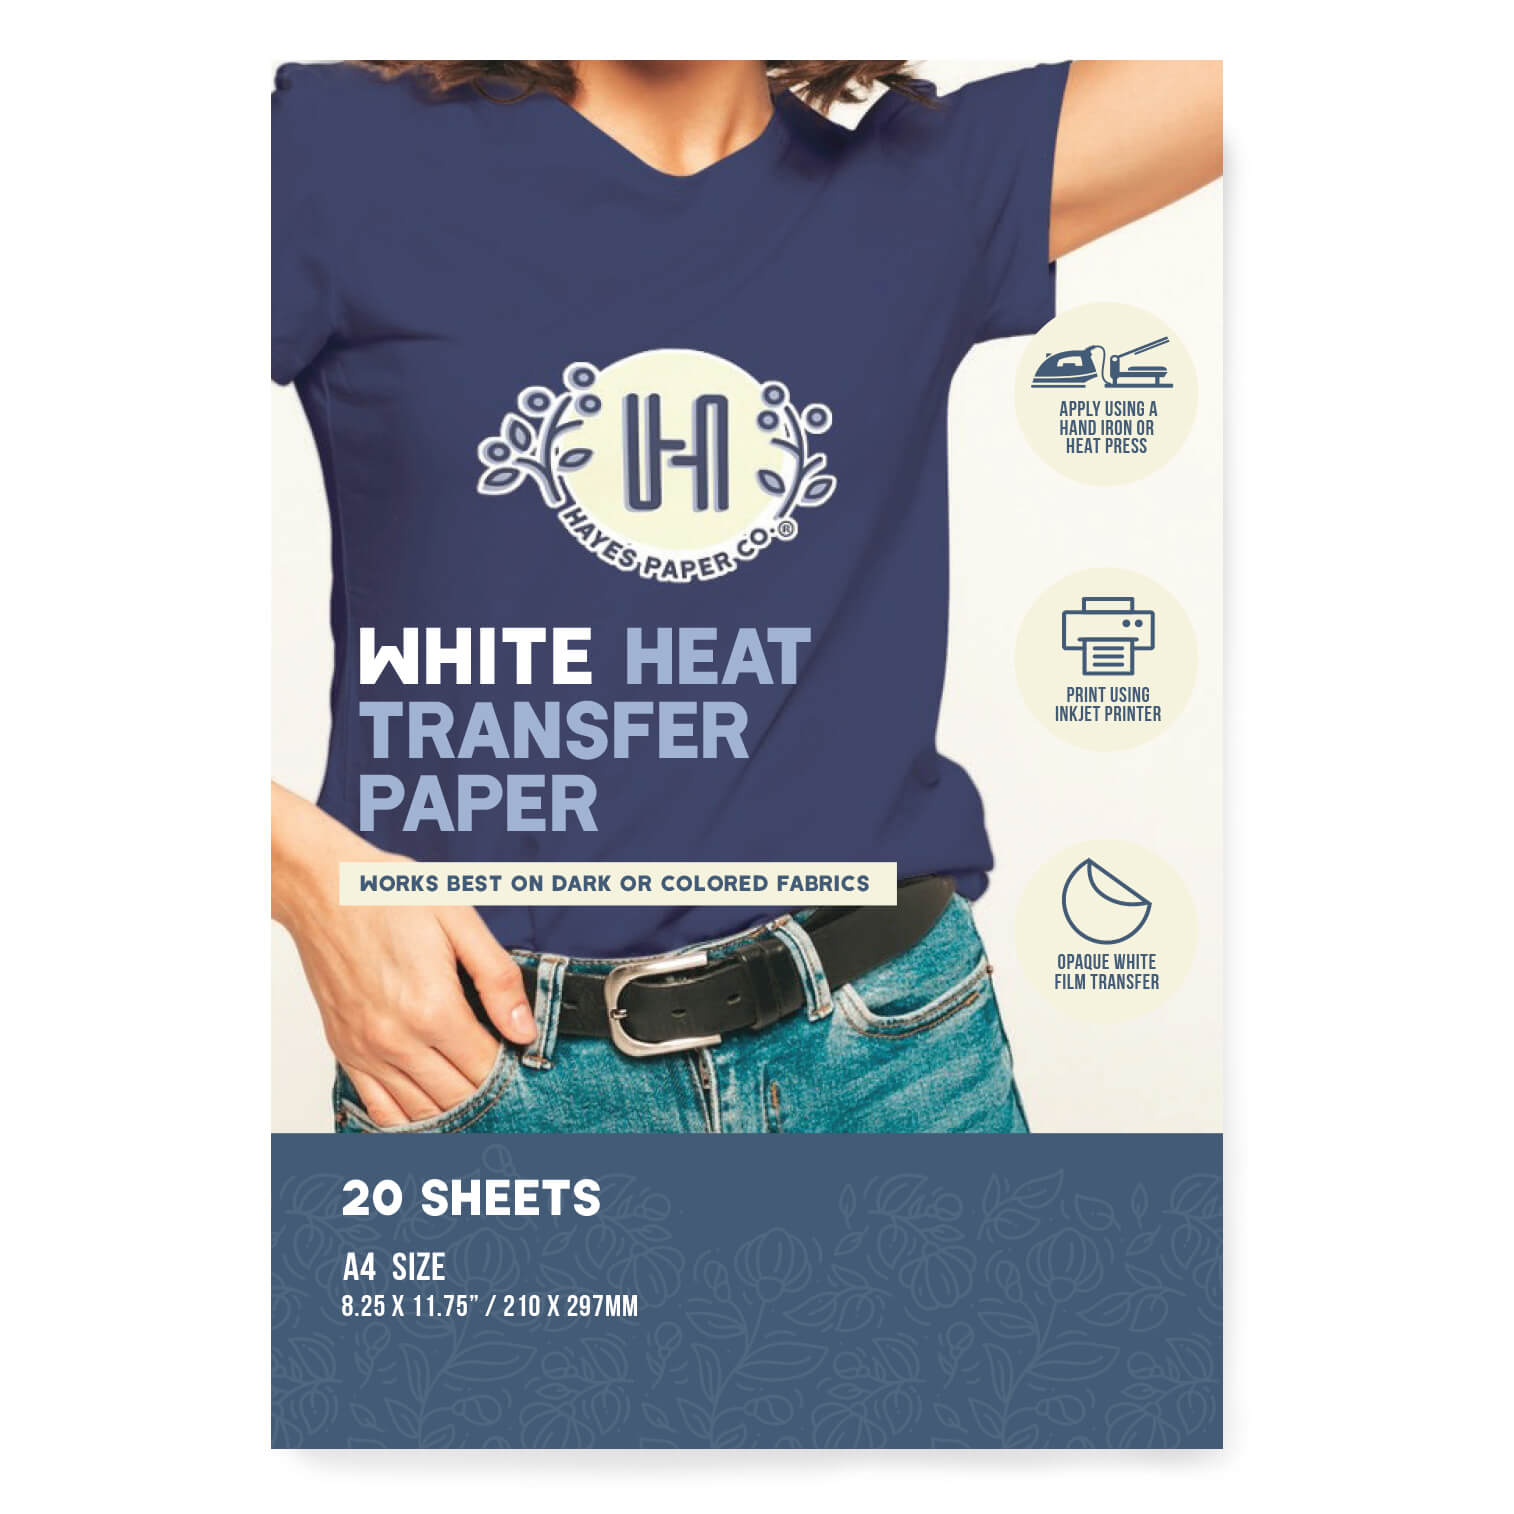 Hayes Paper Co Iron-On Heat Transfer Paper for Colored or Dark Fabrics, White Ba